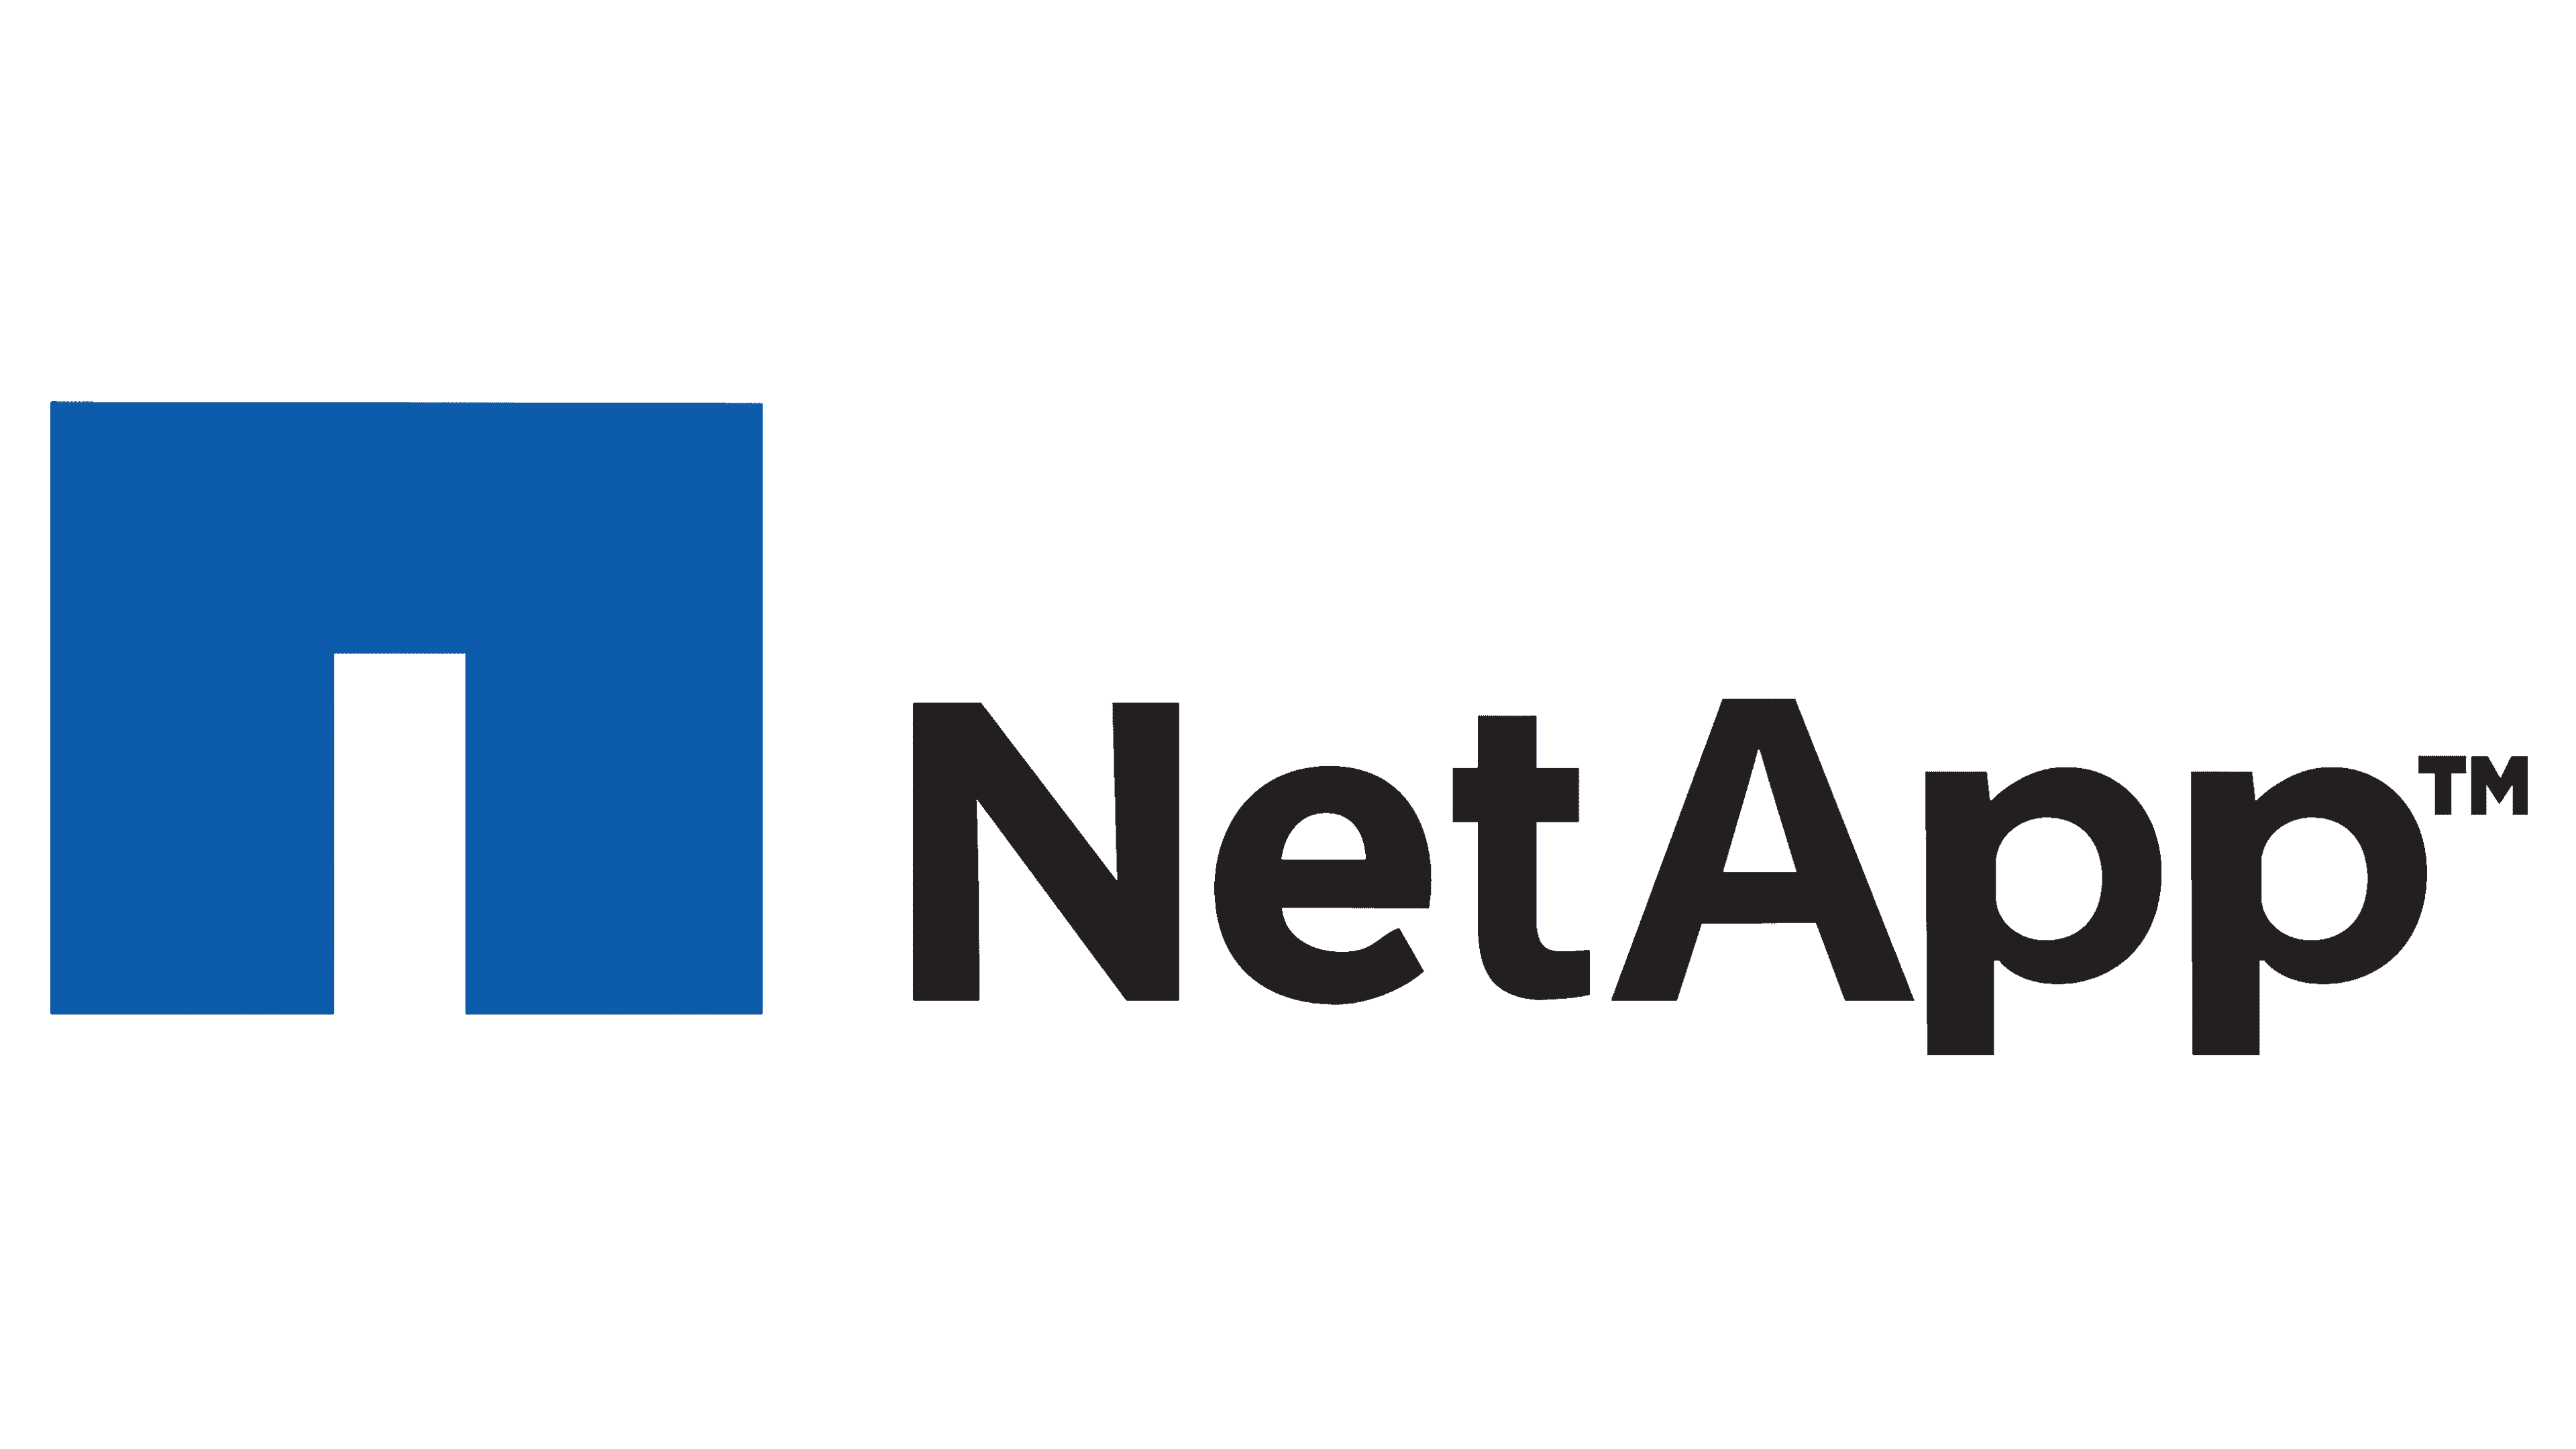 Logo representing NetApp, featuring a blue square with a white arch above the text "NetApp."